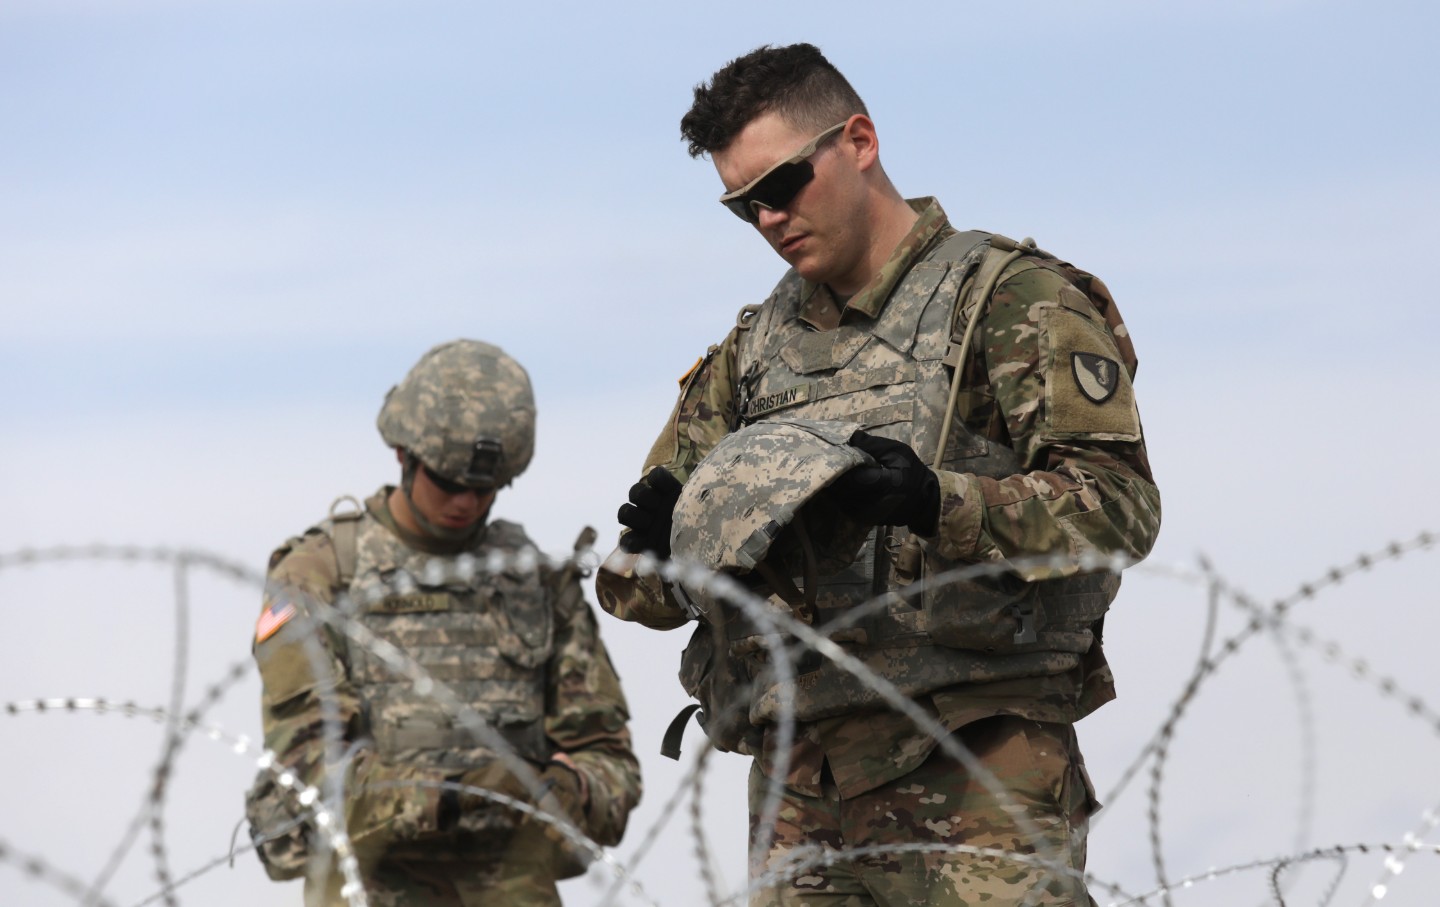 US Army soldiers at US-Mexico border